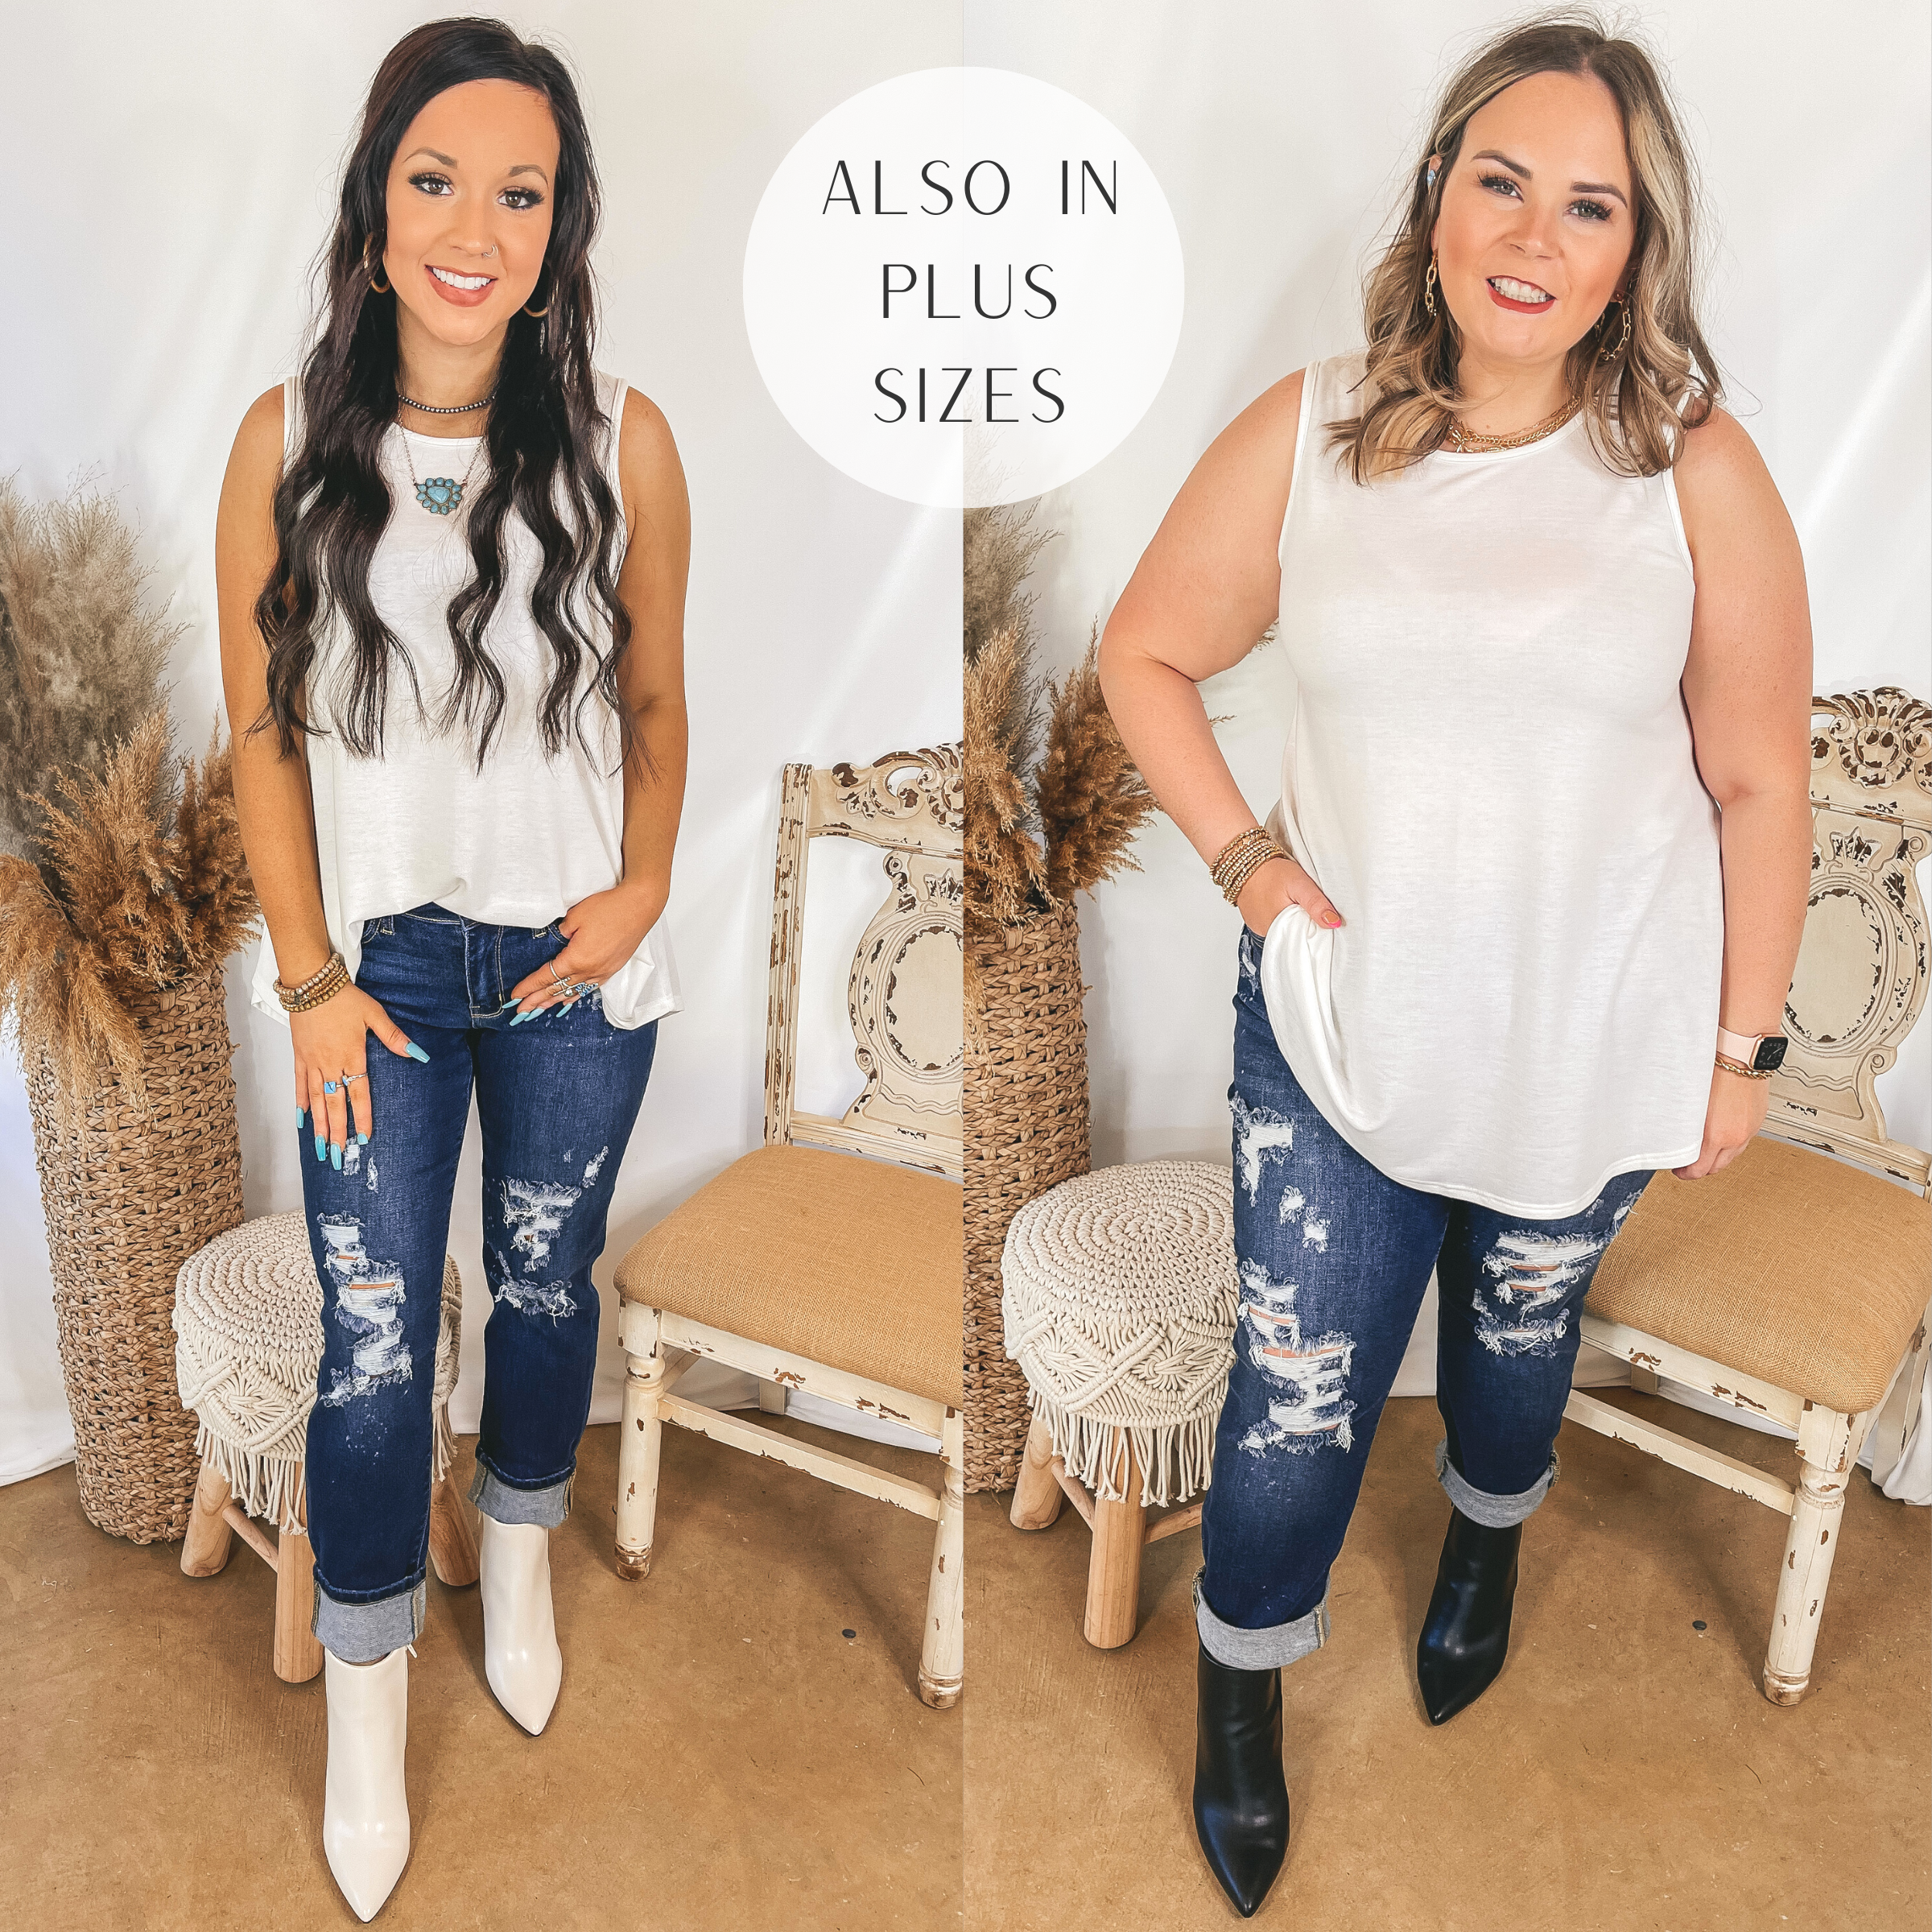 Models are wearing an ivory a line tank top. Both models have it paired with dark wash boyfriend jeans. Size small model has it paired with white booties. Size large model has it paired with black booties and gold jewelry.